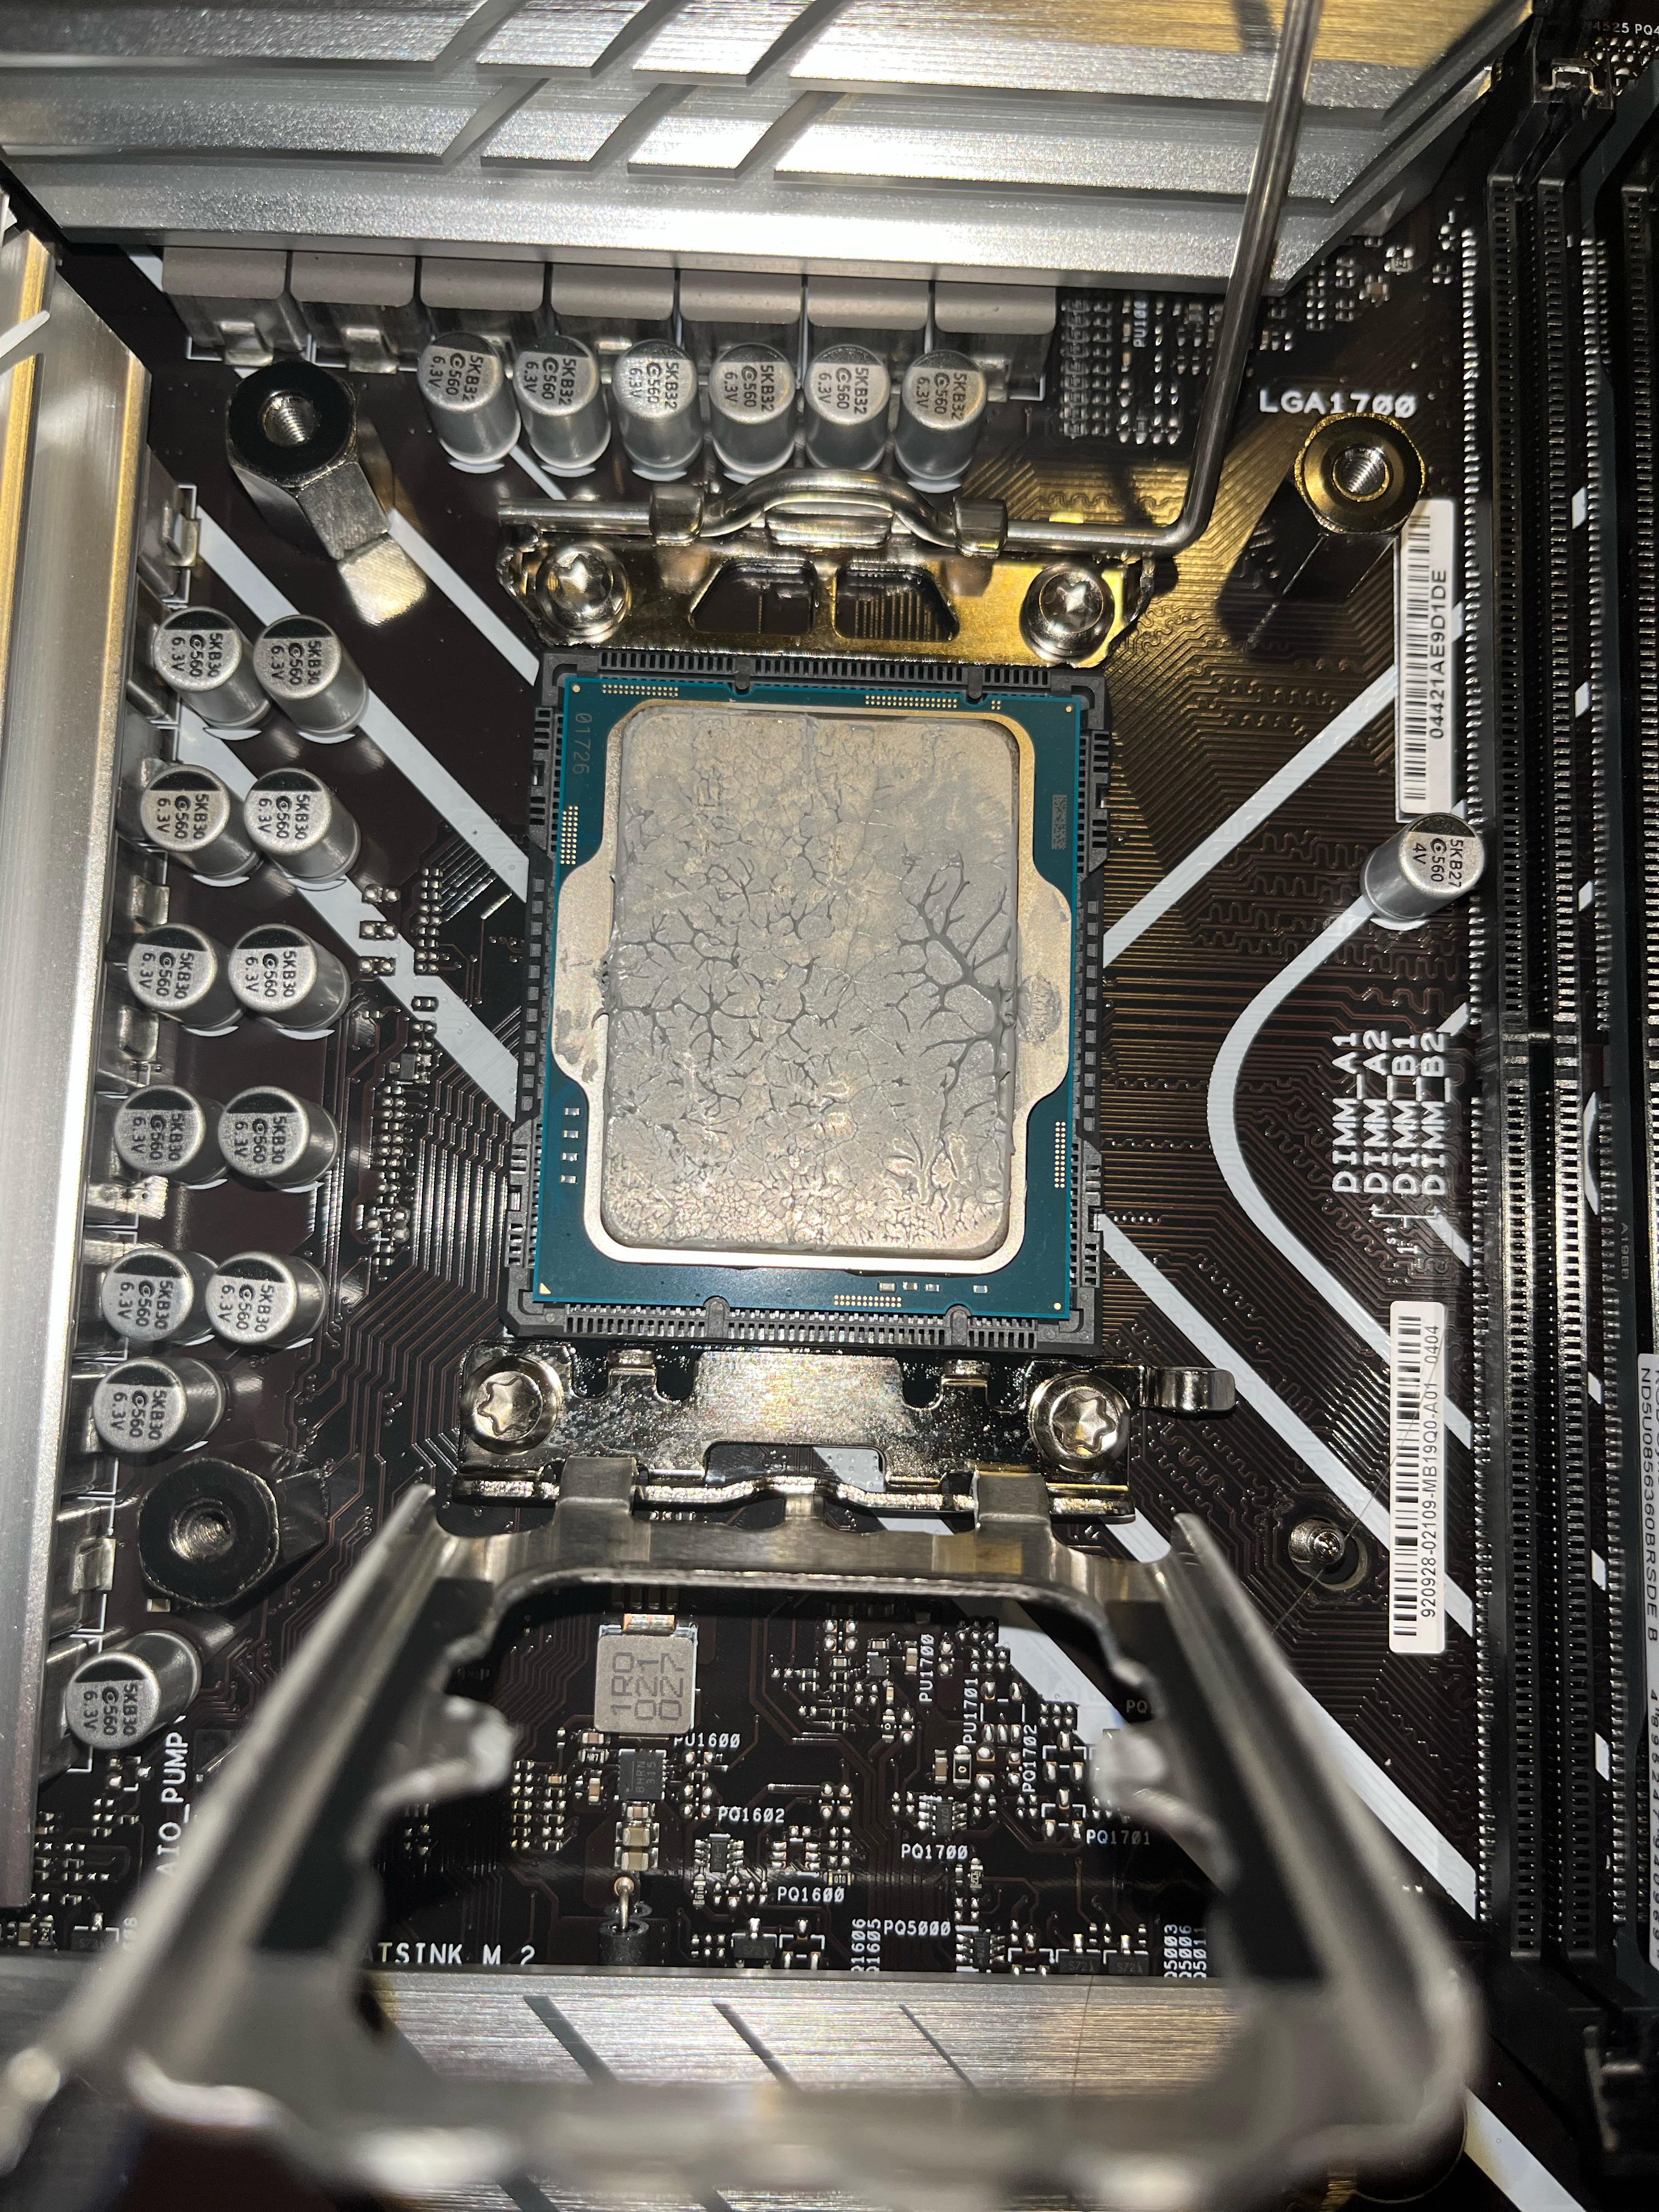 If necessary, replace any malfunctioning fans.
Apply thermal paste to the CPU if needed.